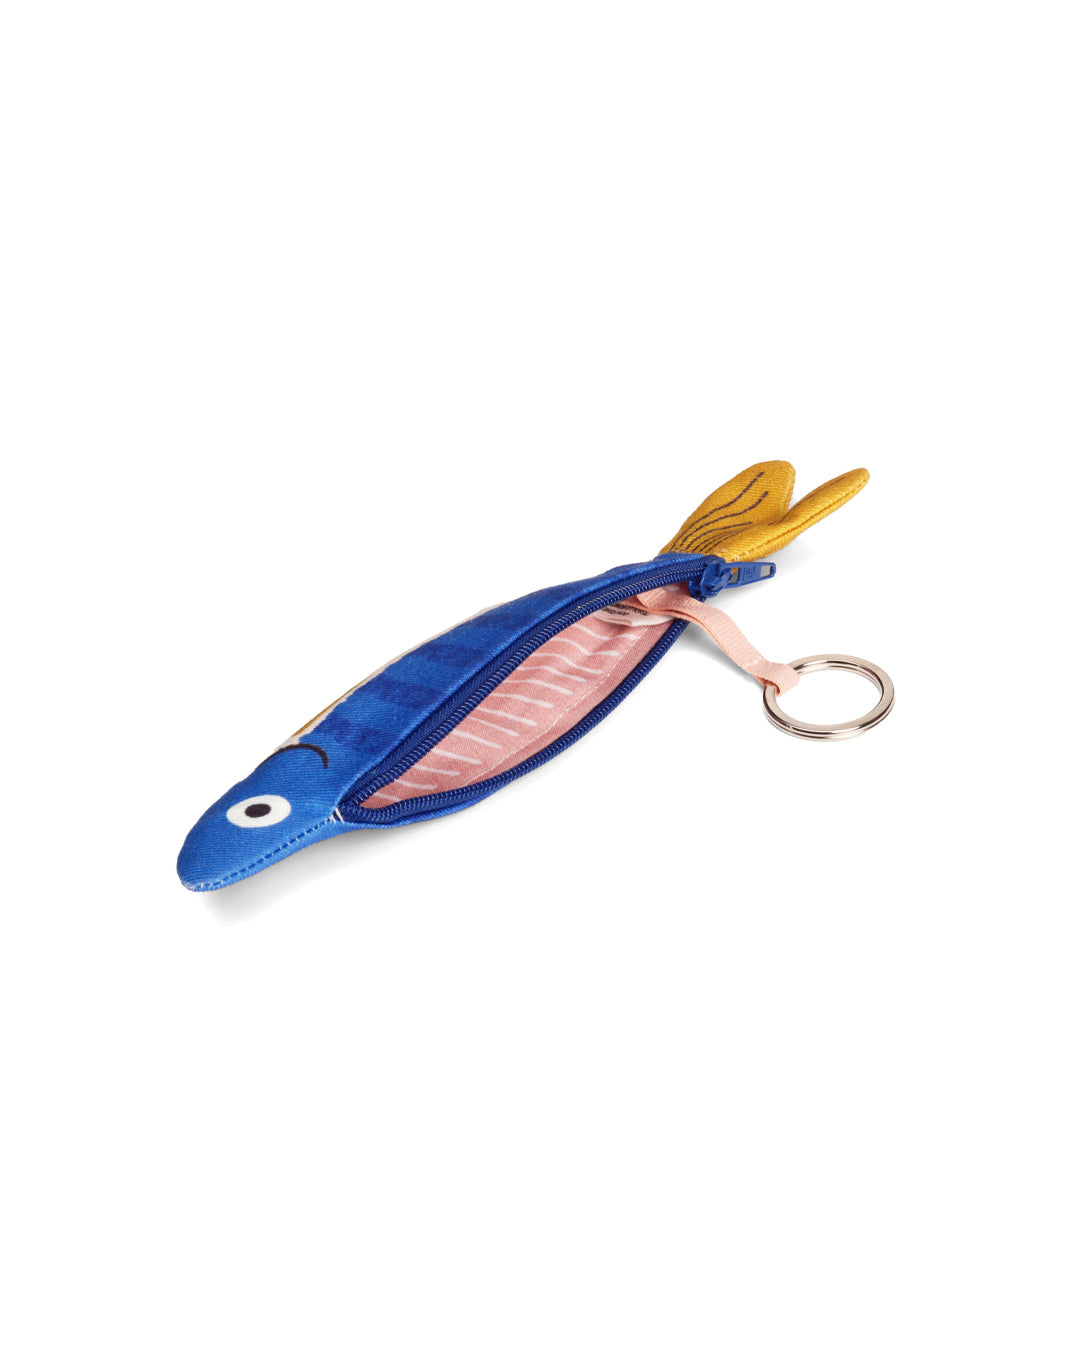 Herring keychain case pencil fish textile fun handmade handcrafted